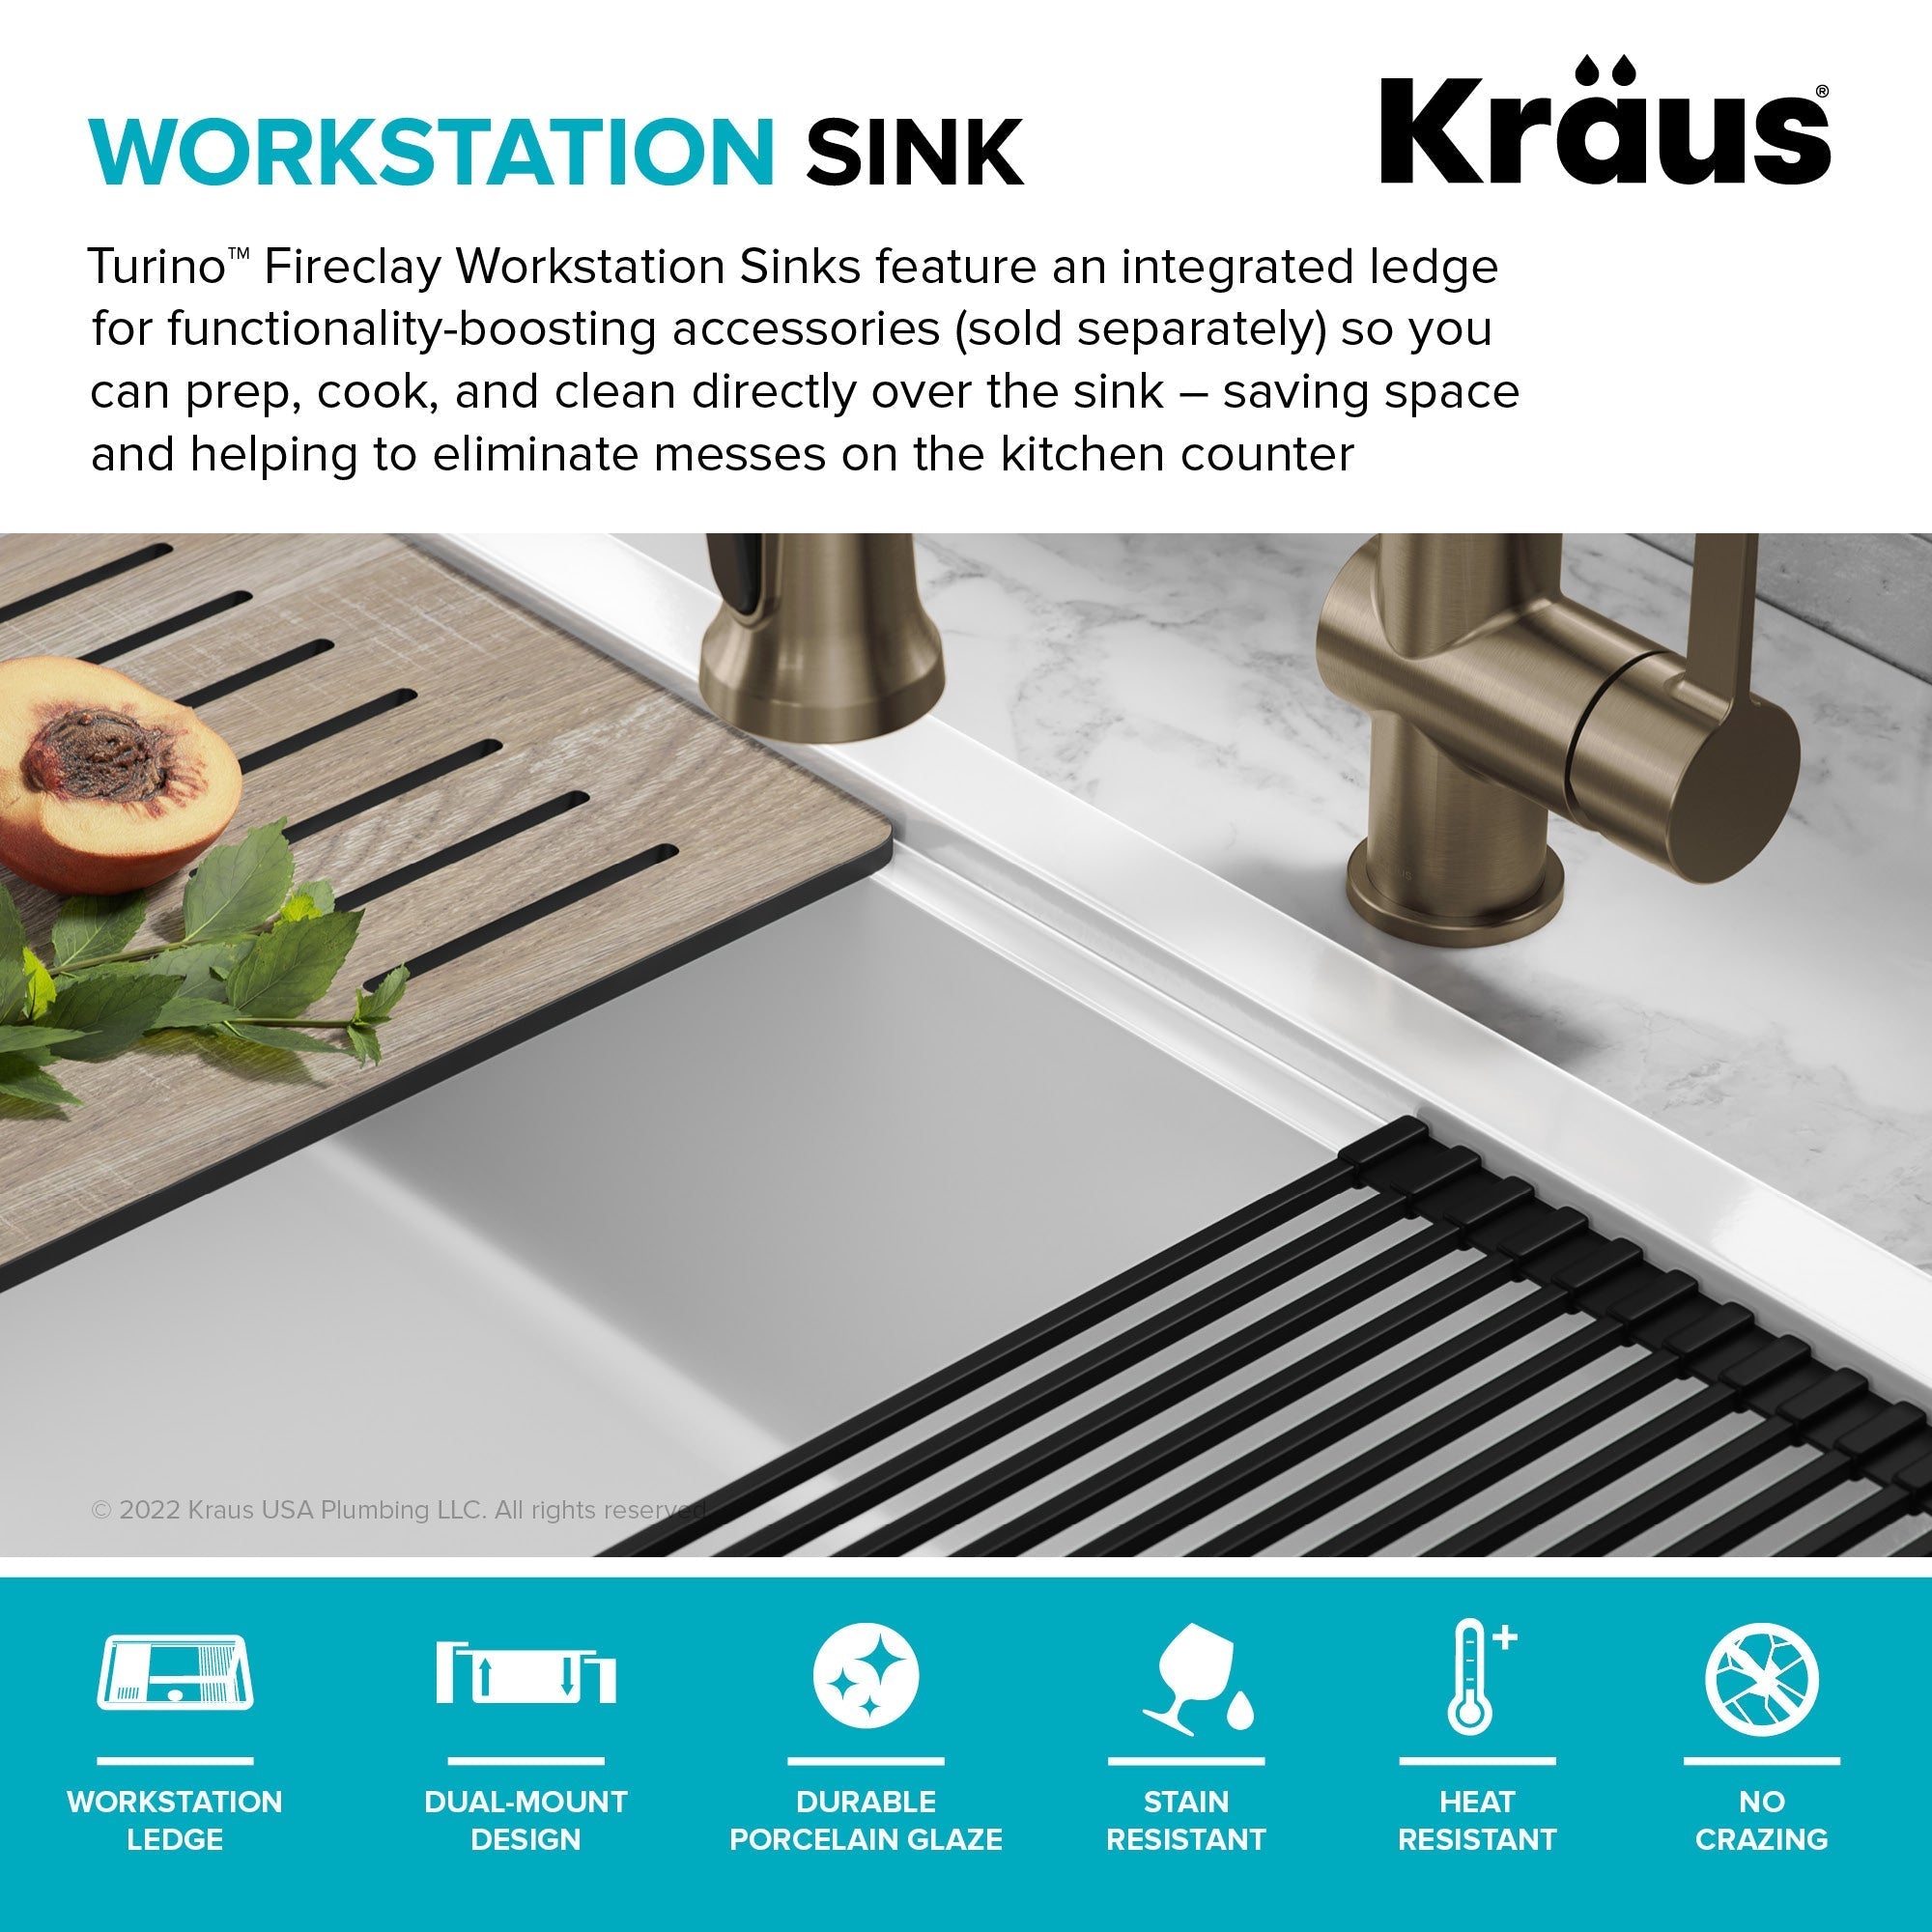 Kraus KDM-10DG Self-Draining Silicone Dish Drying Mat or Trivet for Kitchen Counter in Dark Grey